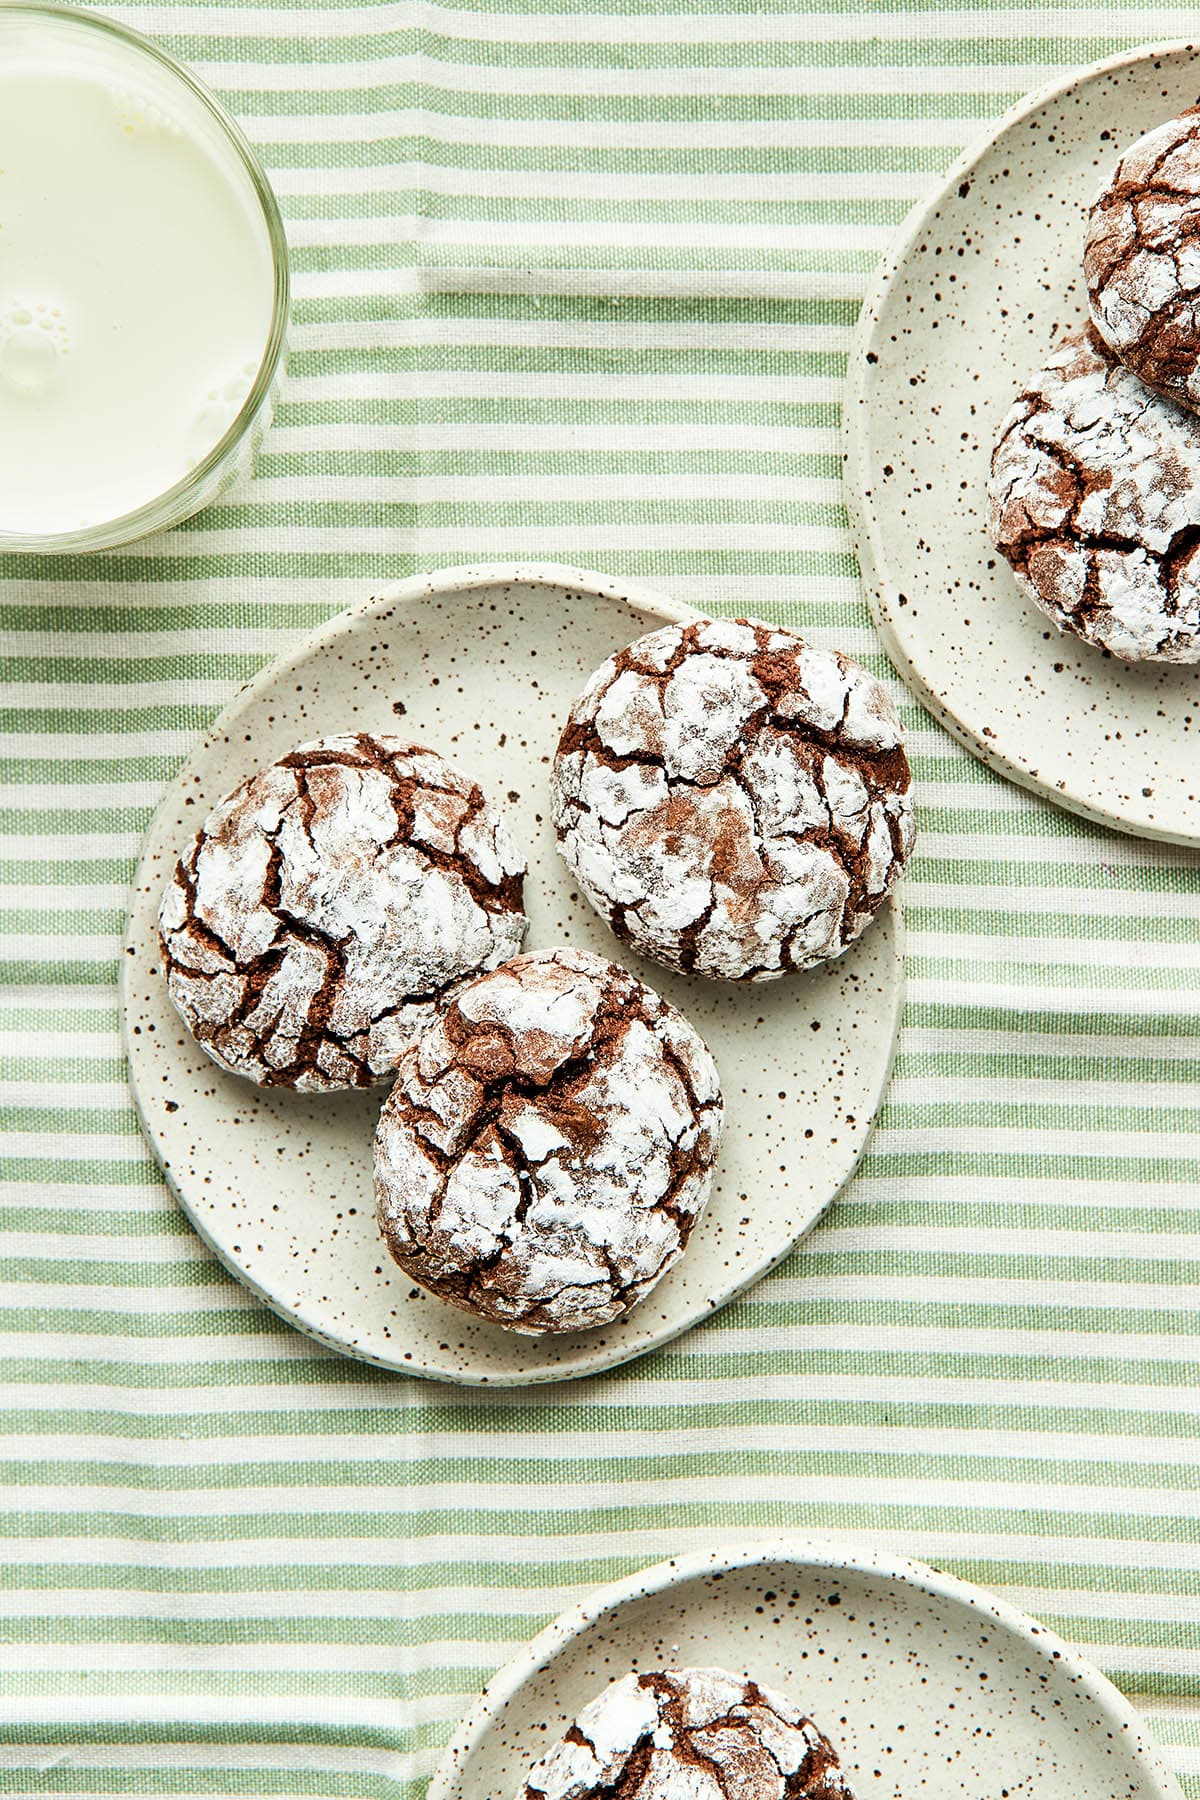 Three small plates with chocolate crinkle cookies on them.